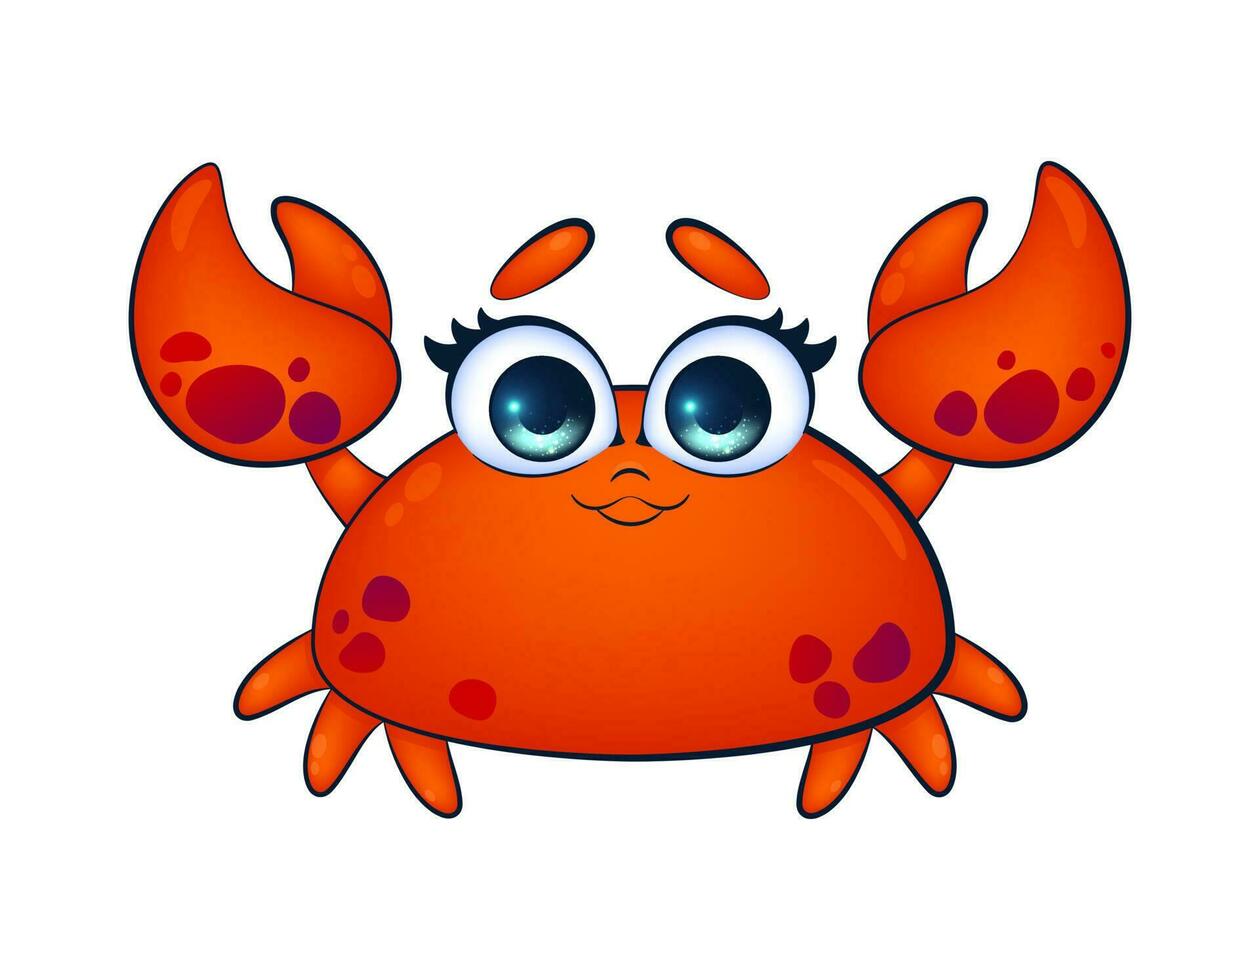 Bright and Colorful Cartoon Crab. Children's Vector Illustration. Vibrant and lively vector illustration of a cute and friendly crab character, perfect for children's designs.